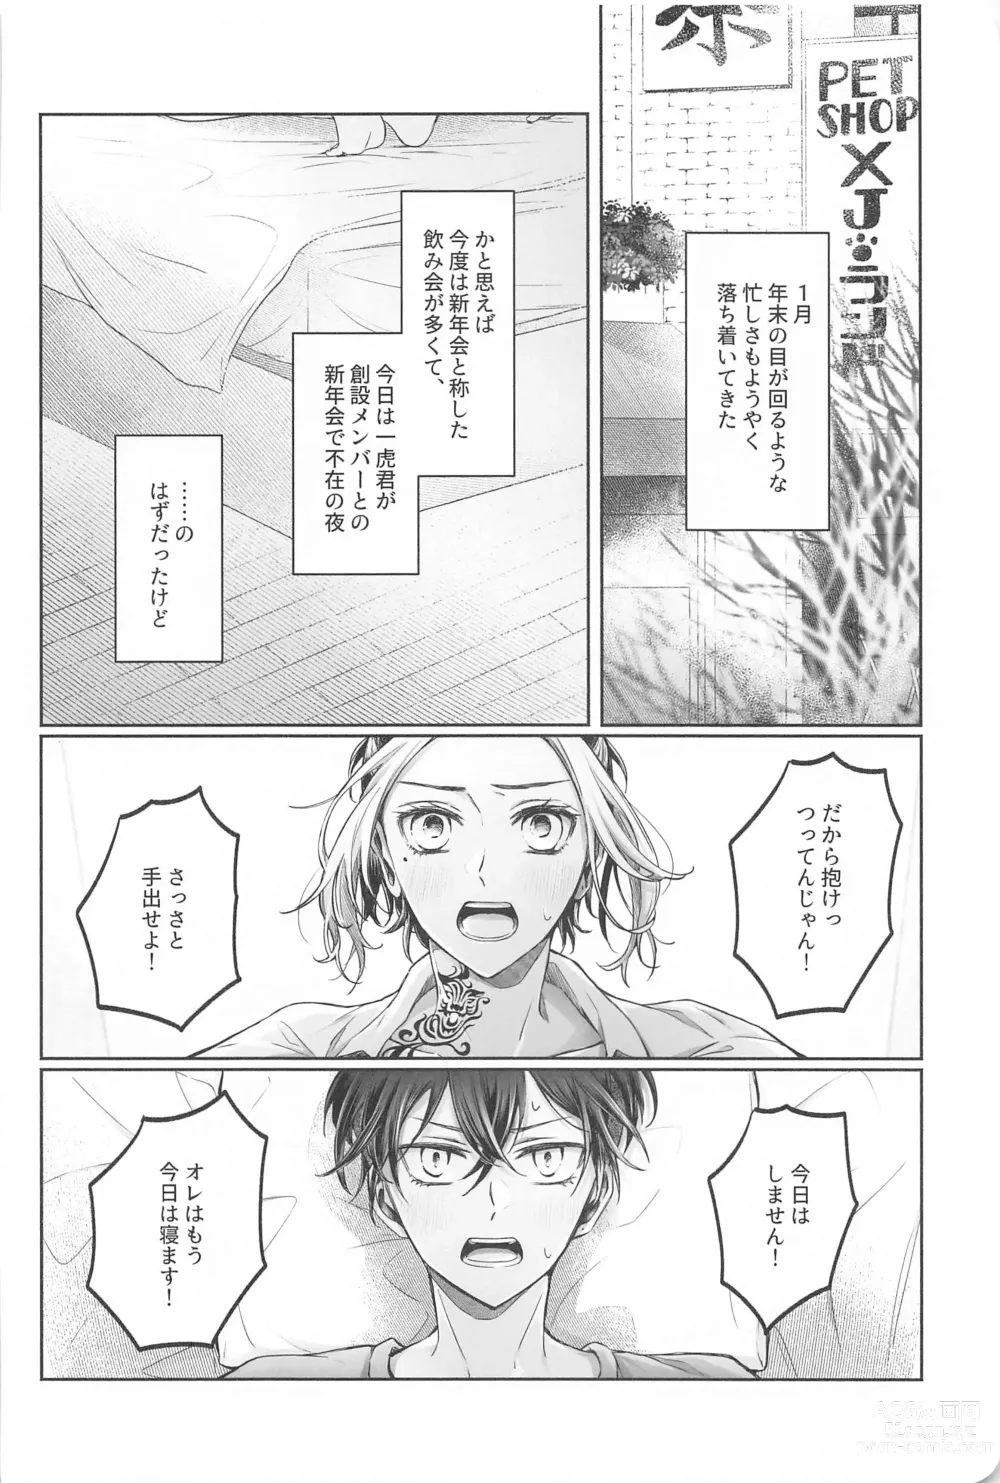 Page 3 of doujinshi Battle of Heart